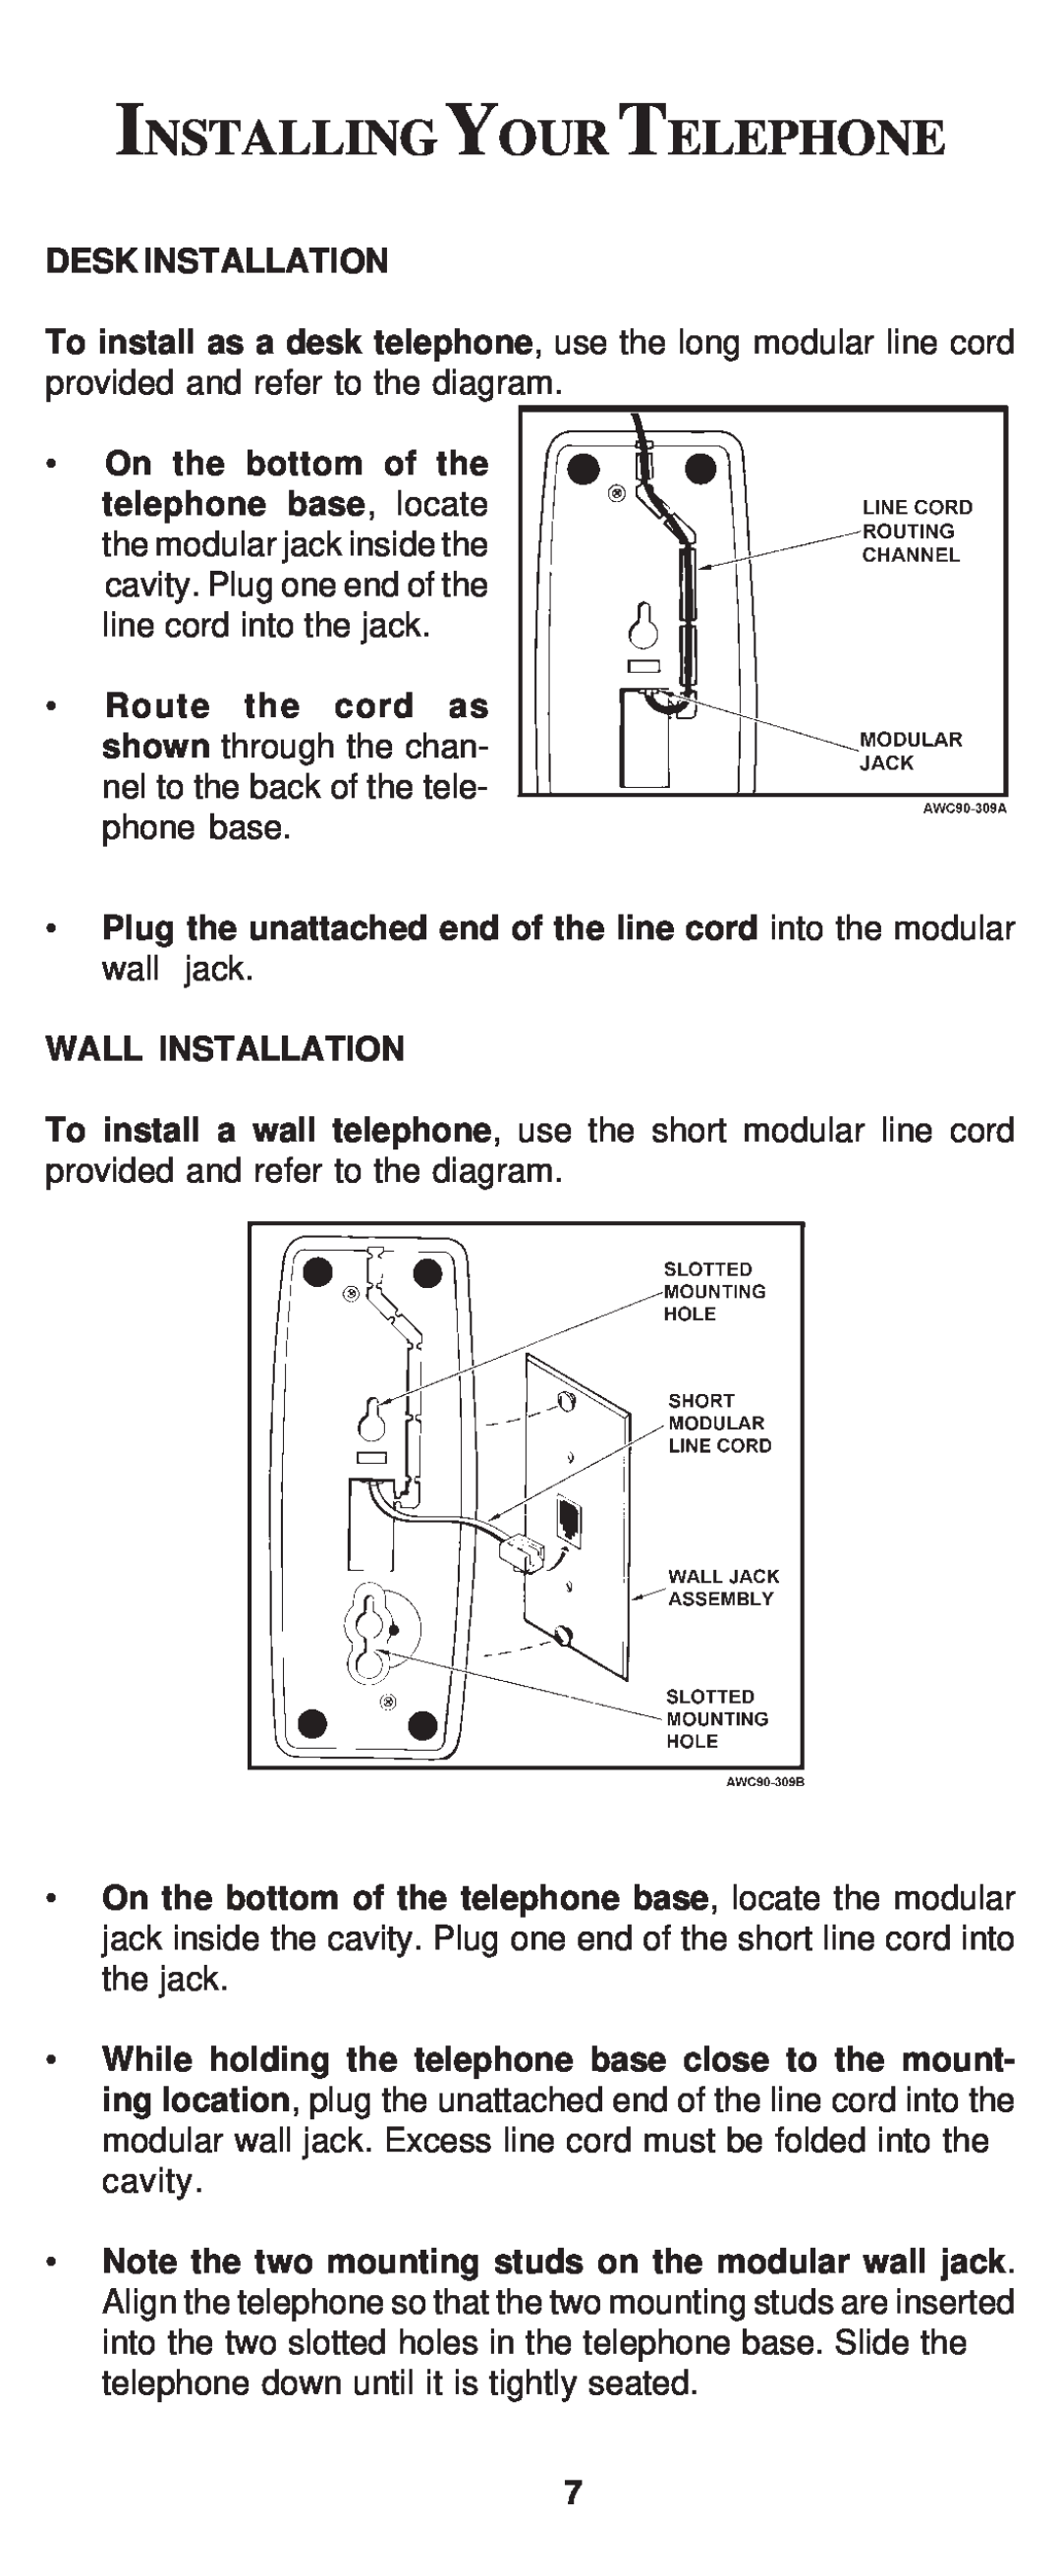 Cortelco 8150 instruction manual Installingyour Telephone 